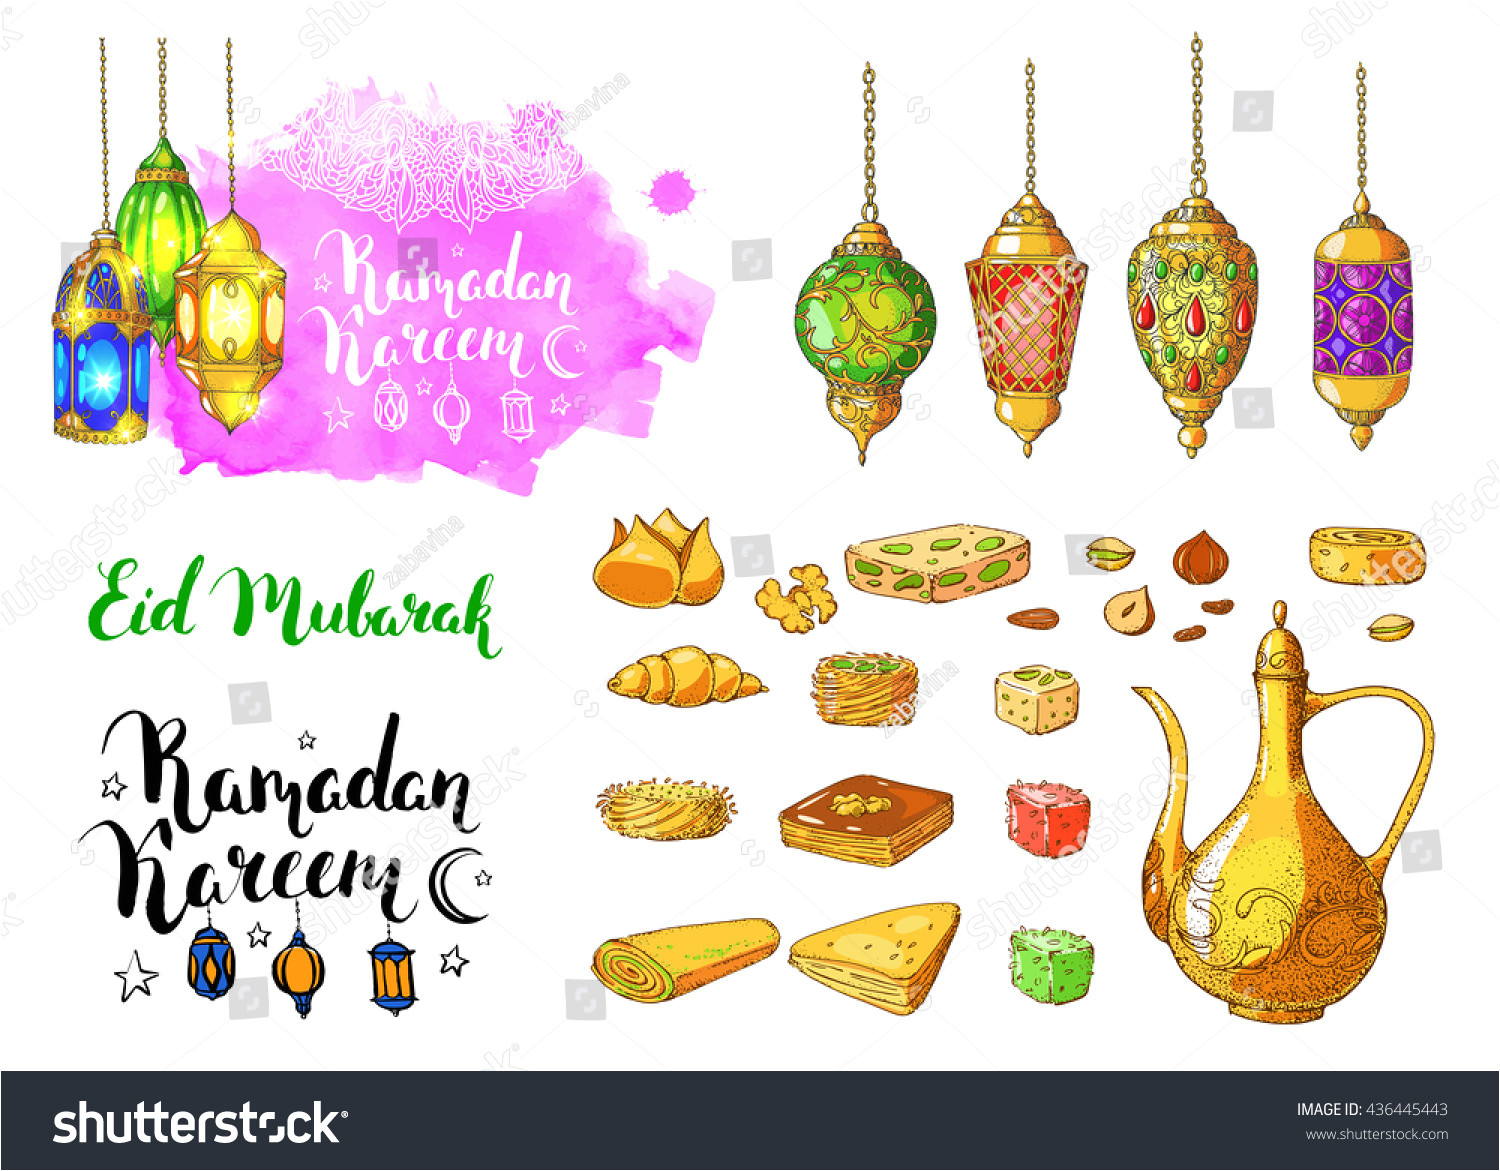 stock vector mosque and lanterns traditional arabic halal food vector watercolor background ink hand drawn 436445443 jpg